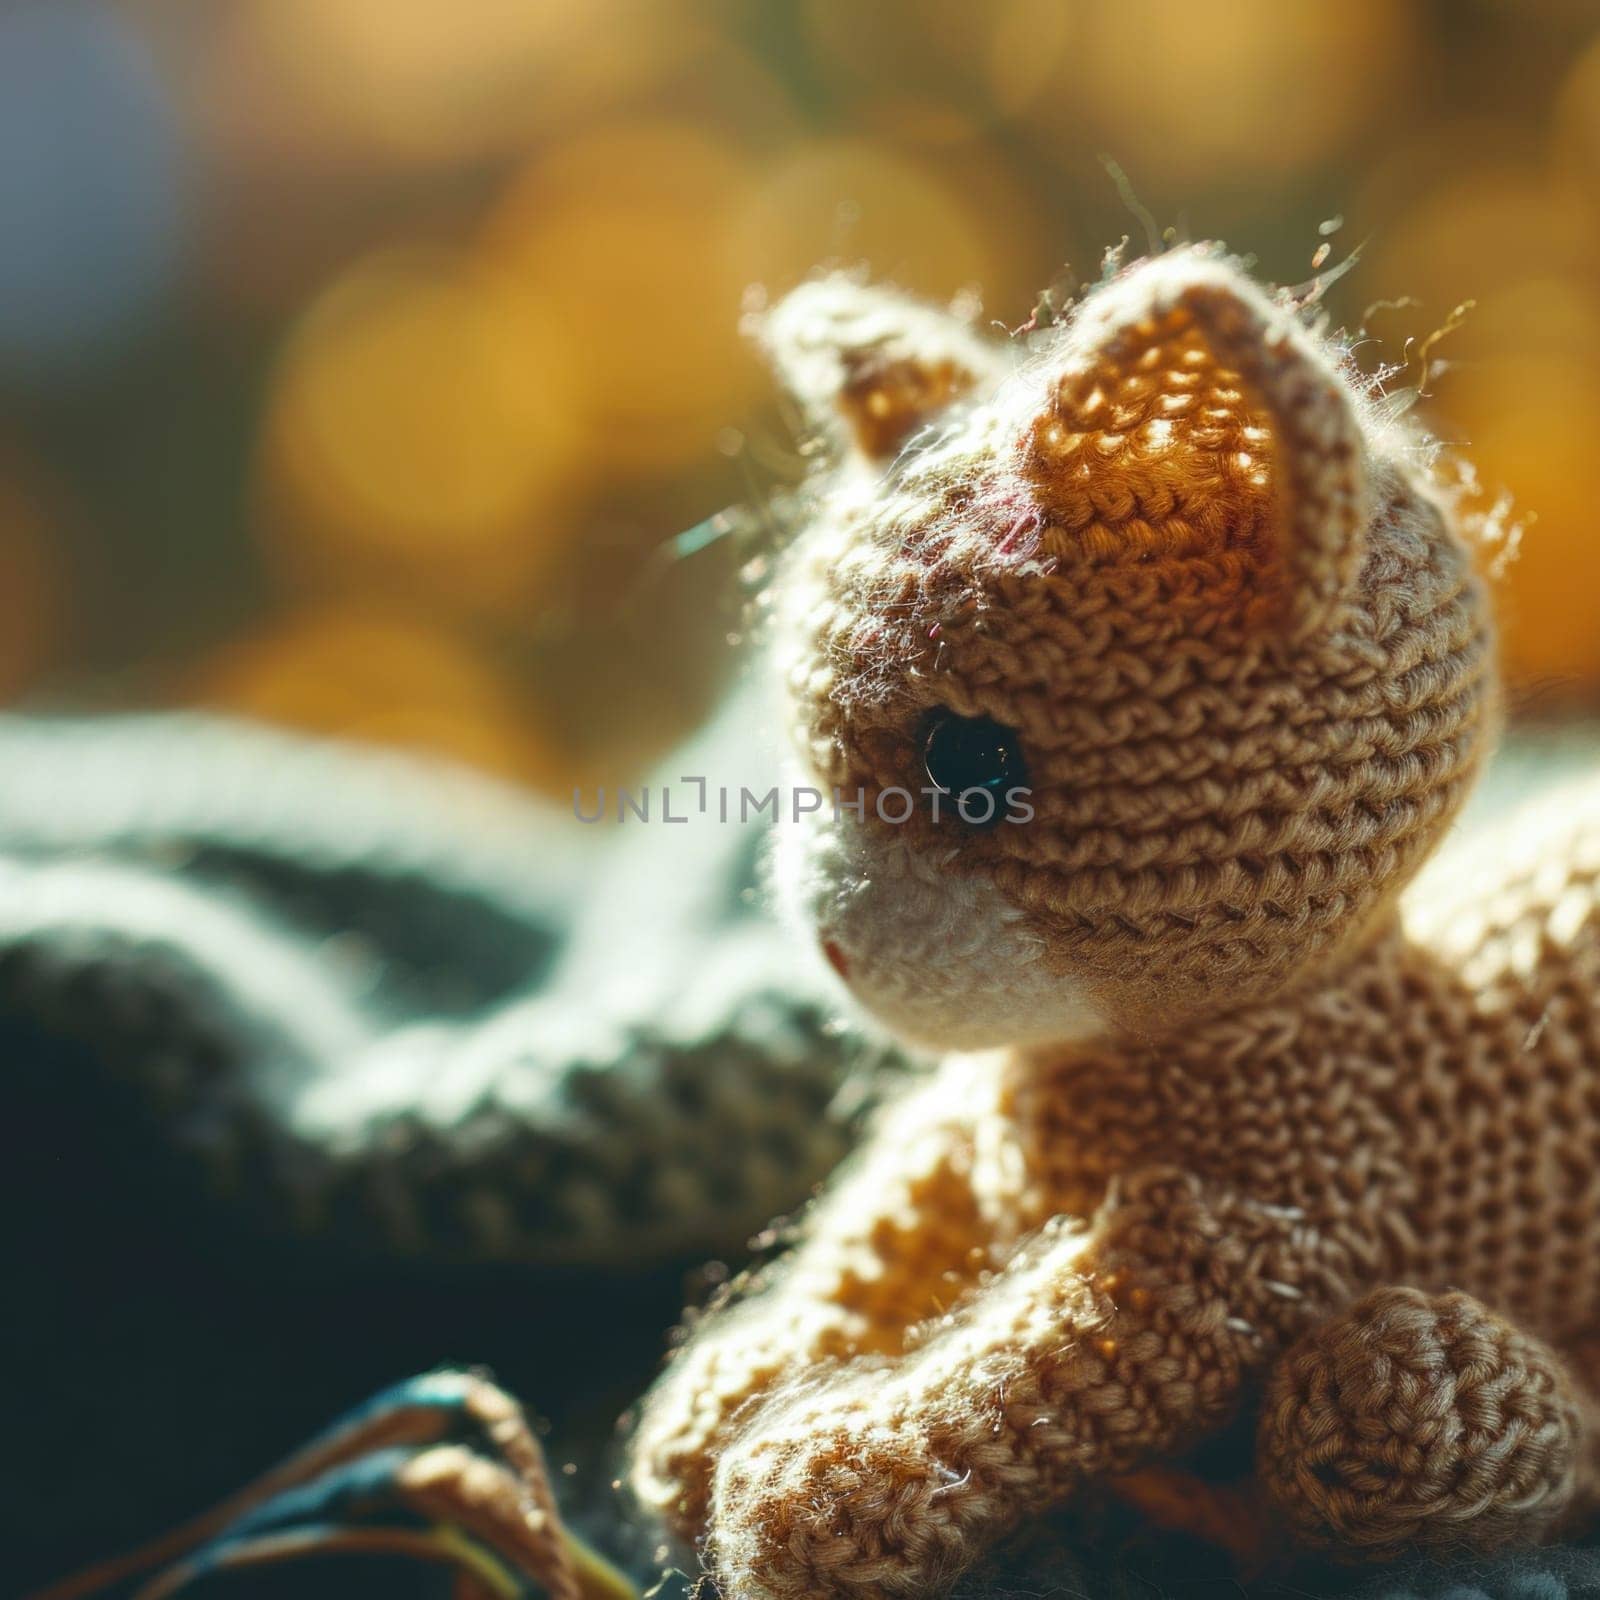 A close up of a knitted stuffed animal sitting on top of something